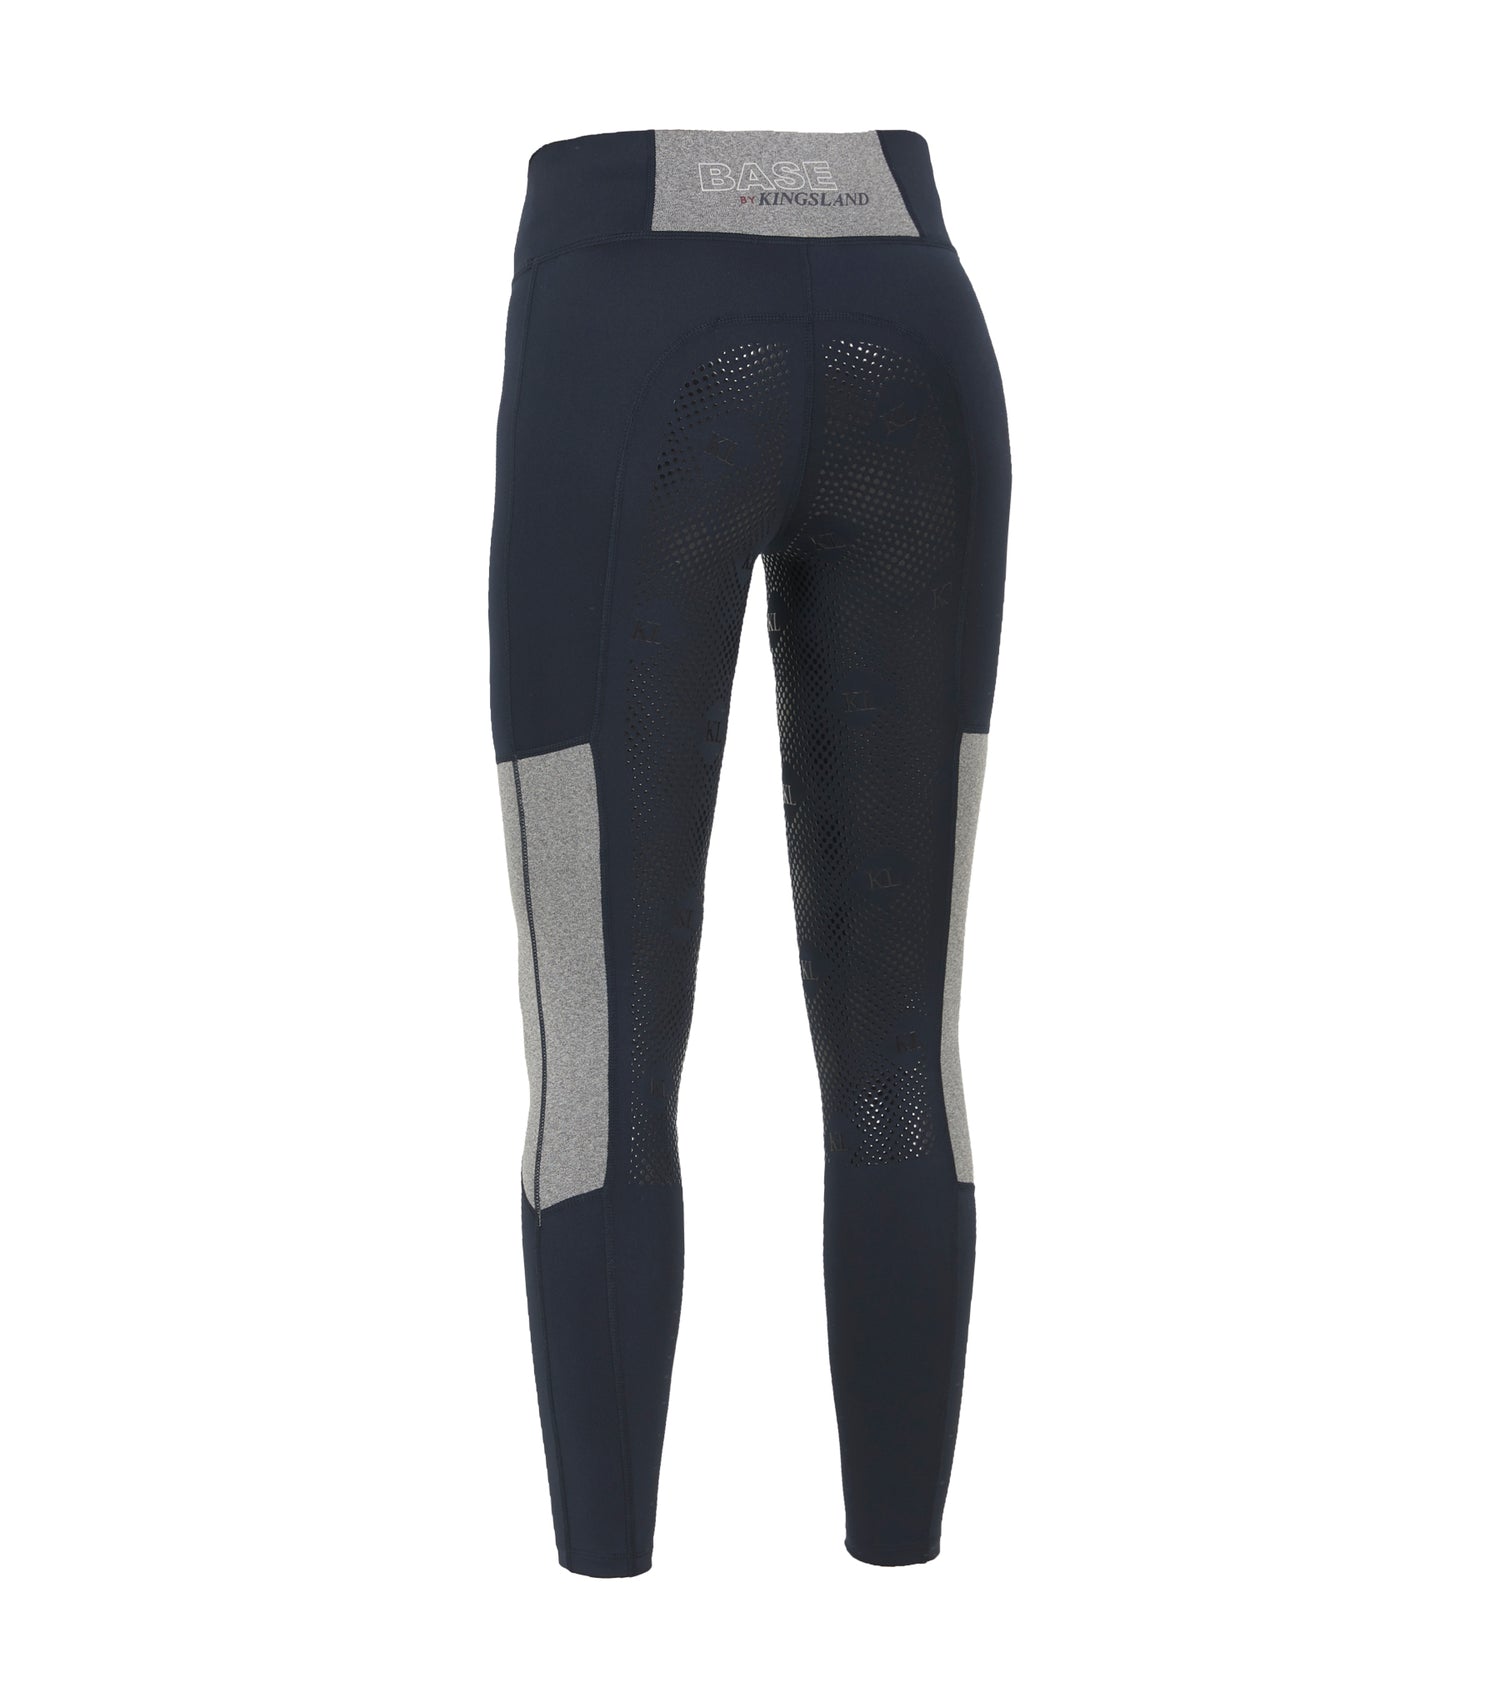 horse riding tights with pockets